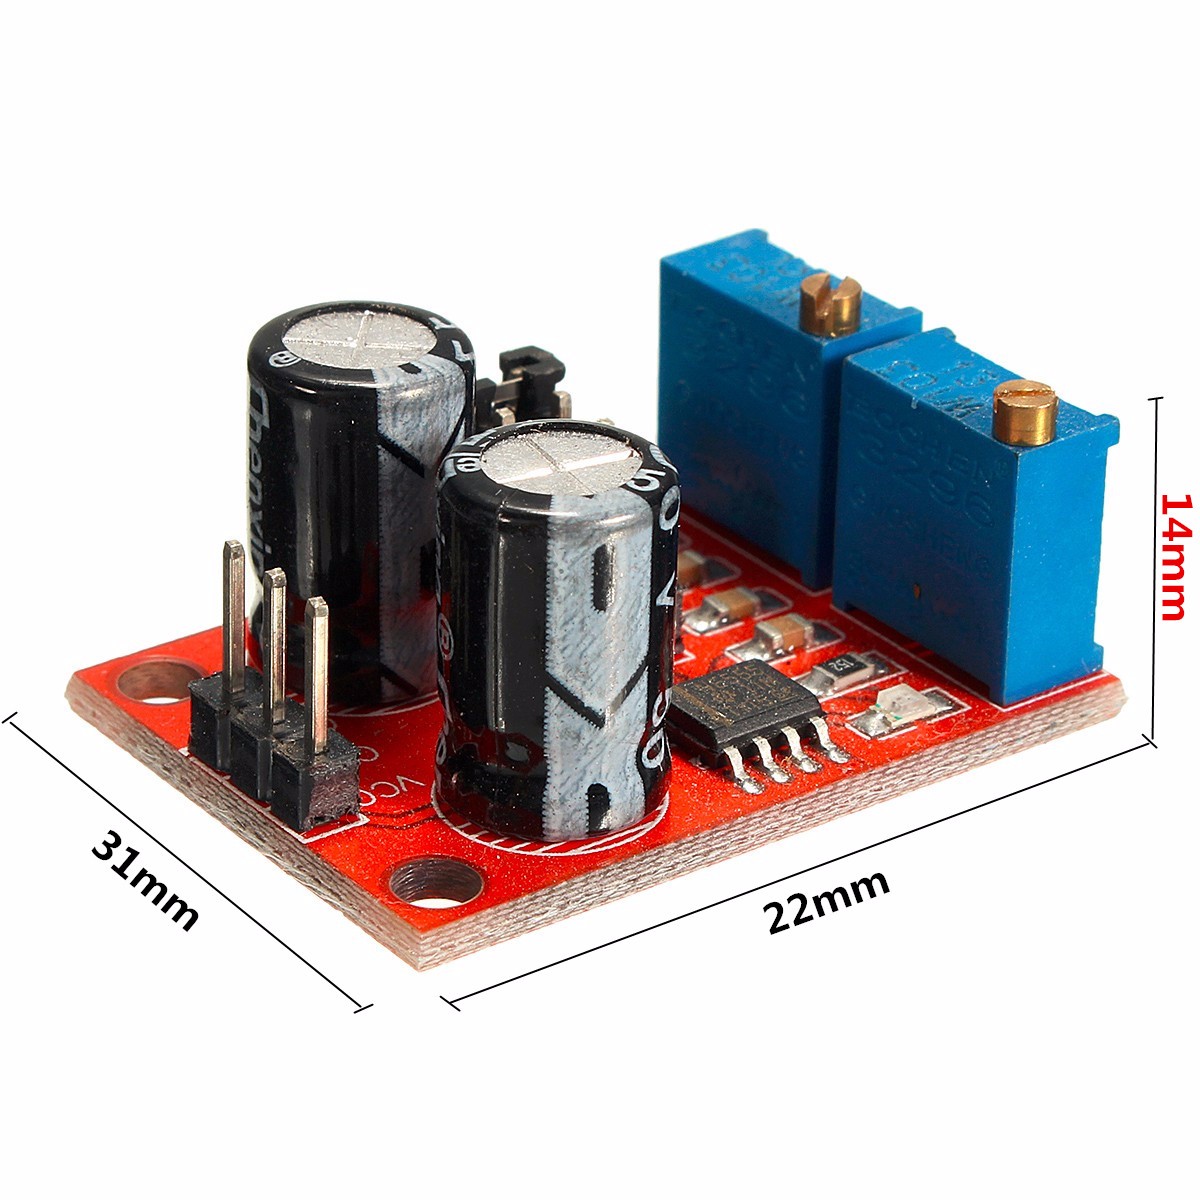 20pcs-NE555-Pulse-Frequency-Duty-Cycle-Adjustable-Module-Square-Wave-Signal-Generator-Stepper-Motor--1171963